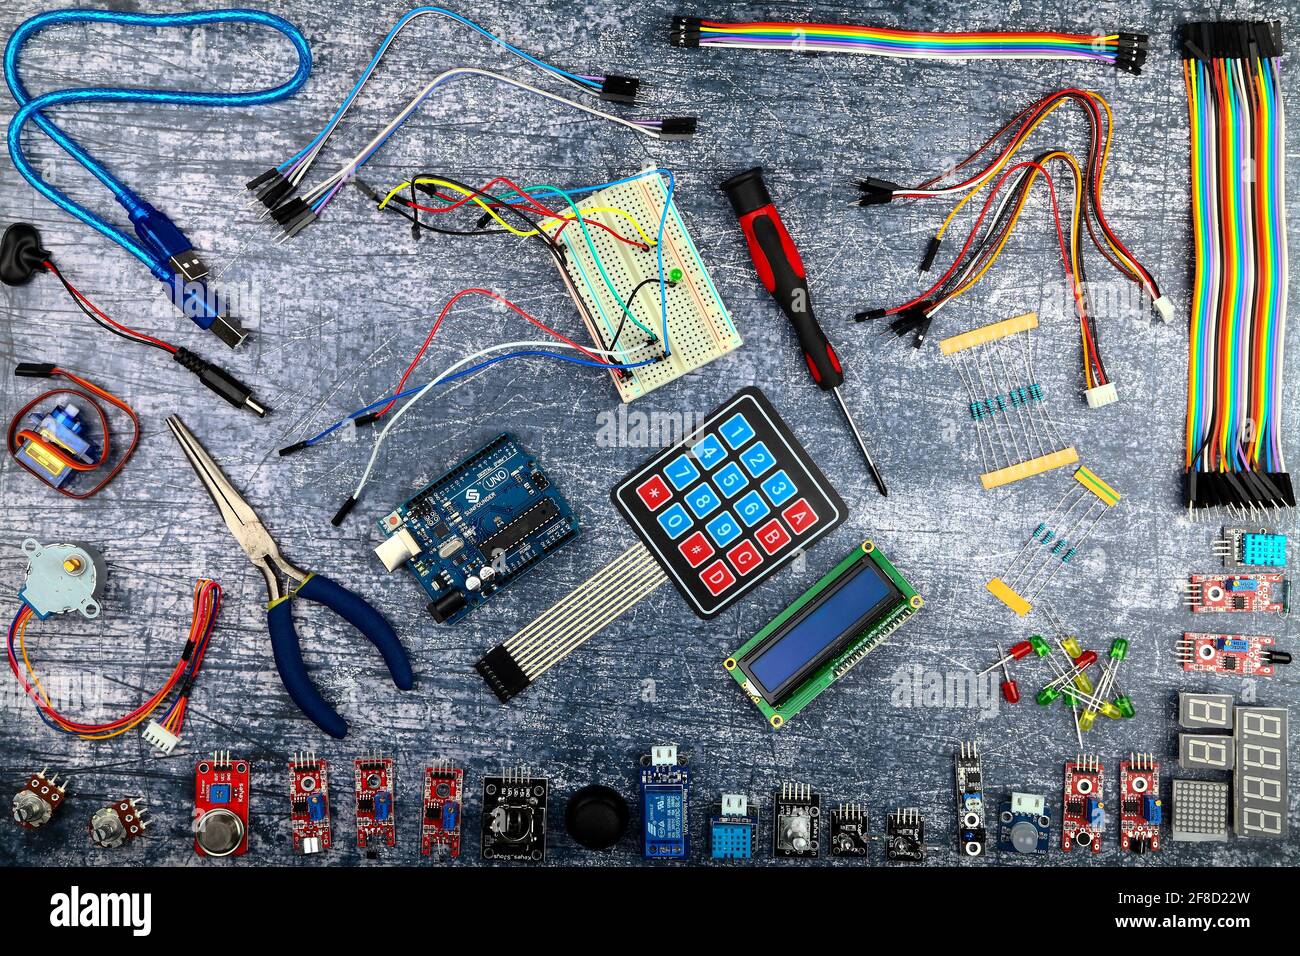 Arduino uno and electronic components flatlay on a blue rustic background Stock Photo